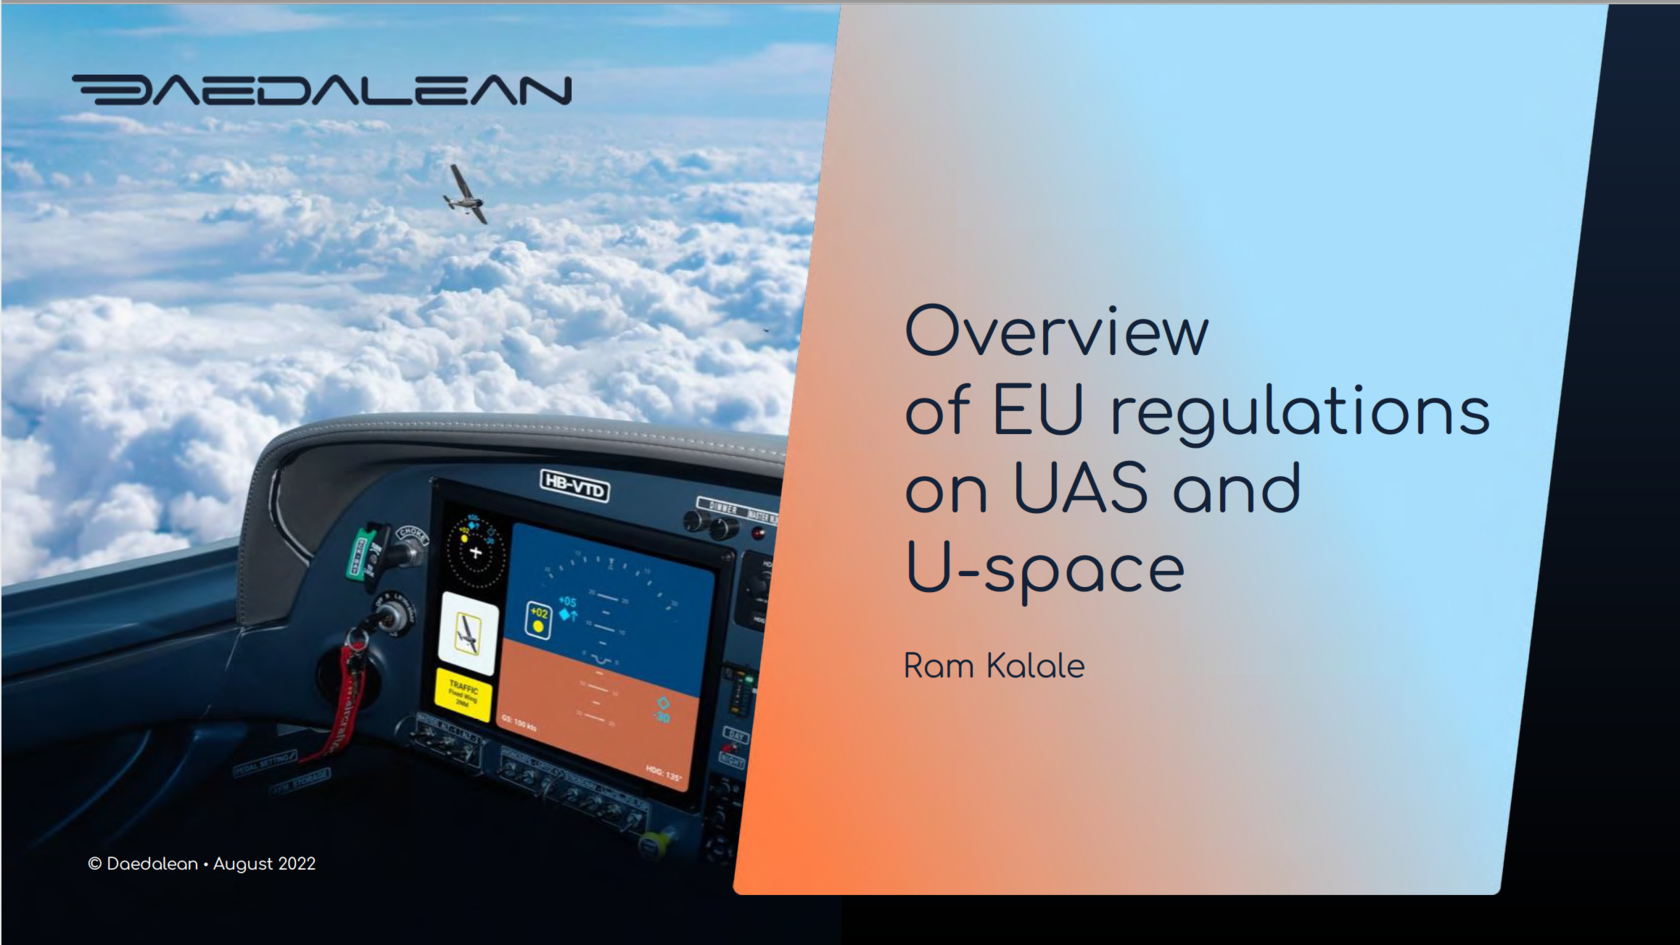 Overview of EU regulations and UAS and U-space